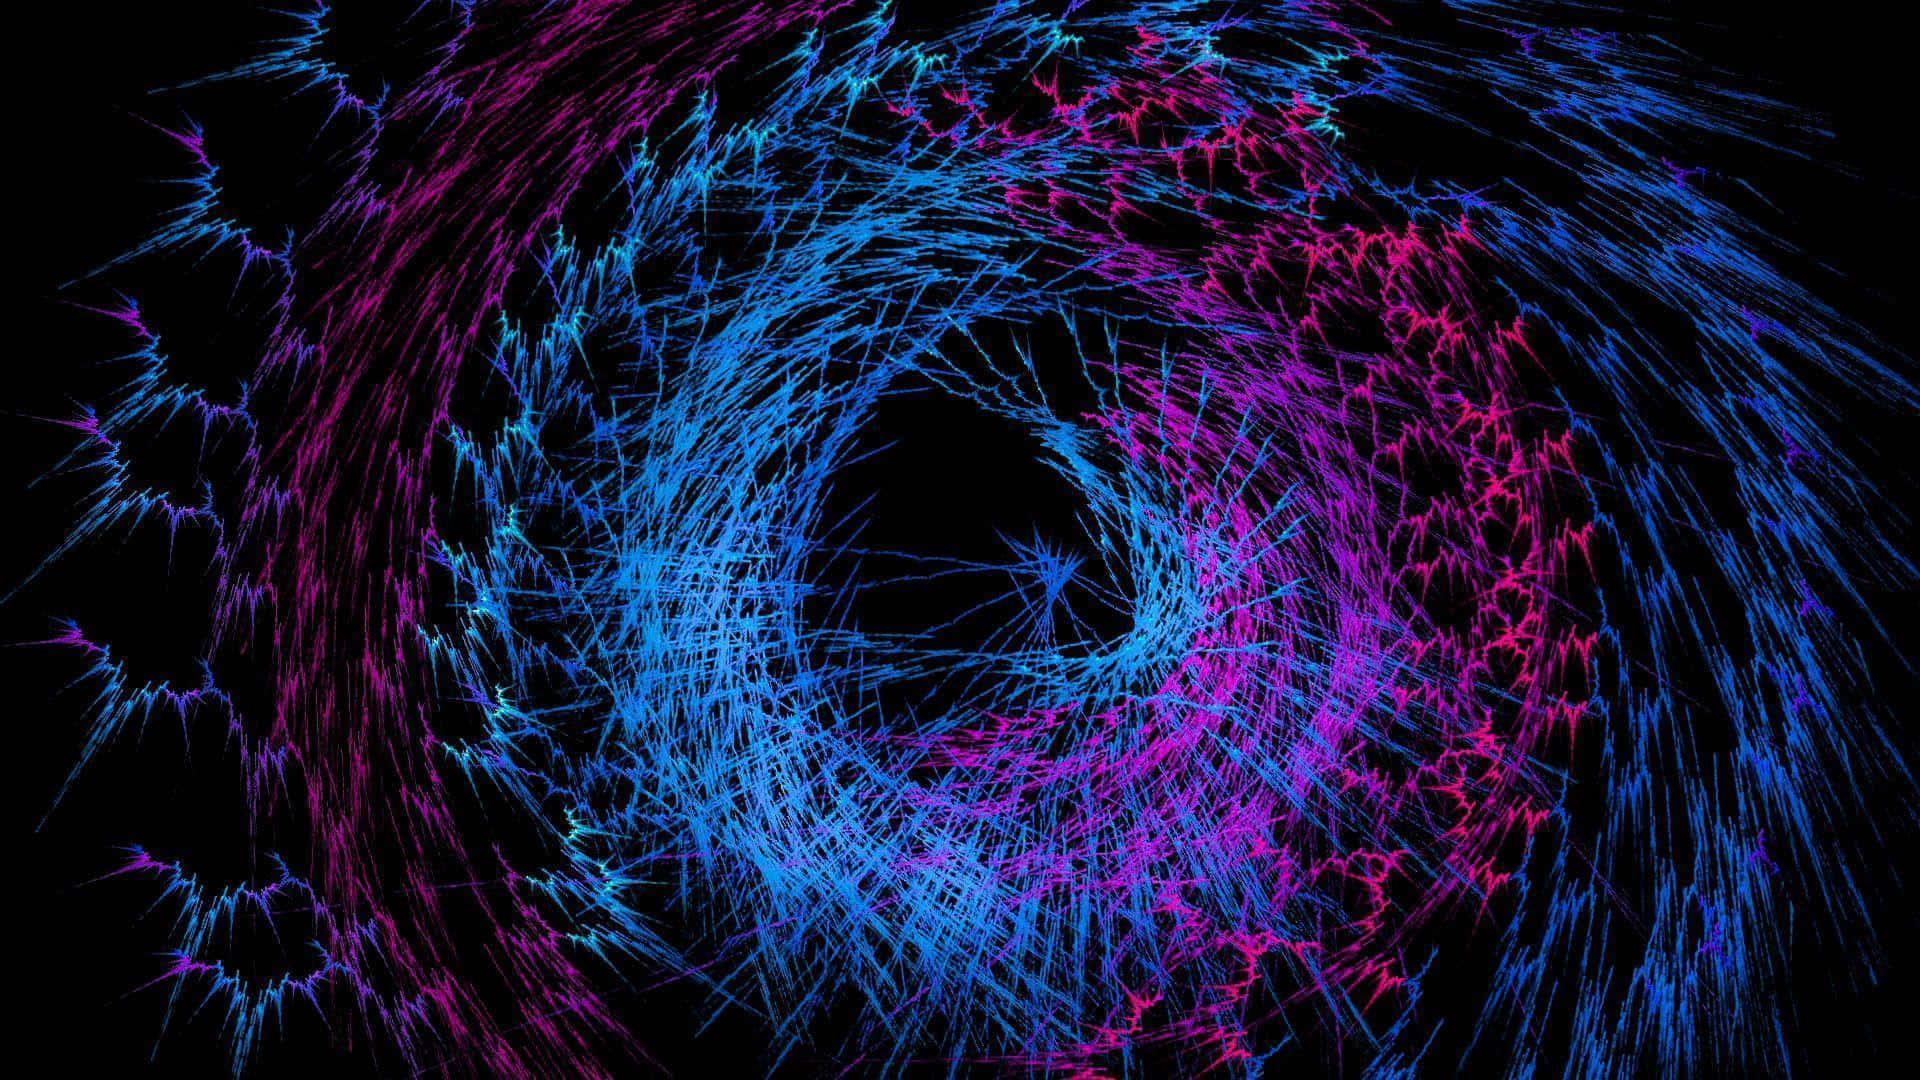 A Blue And Purple Spiral With A Black Background